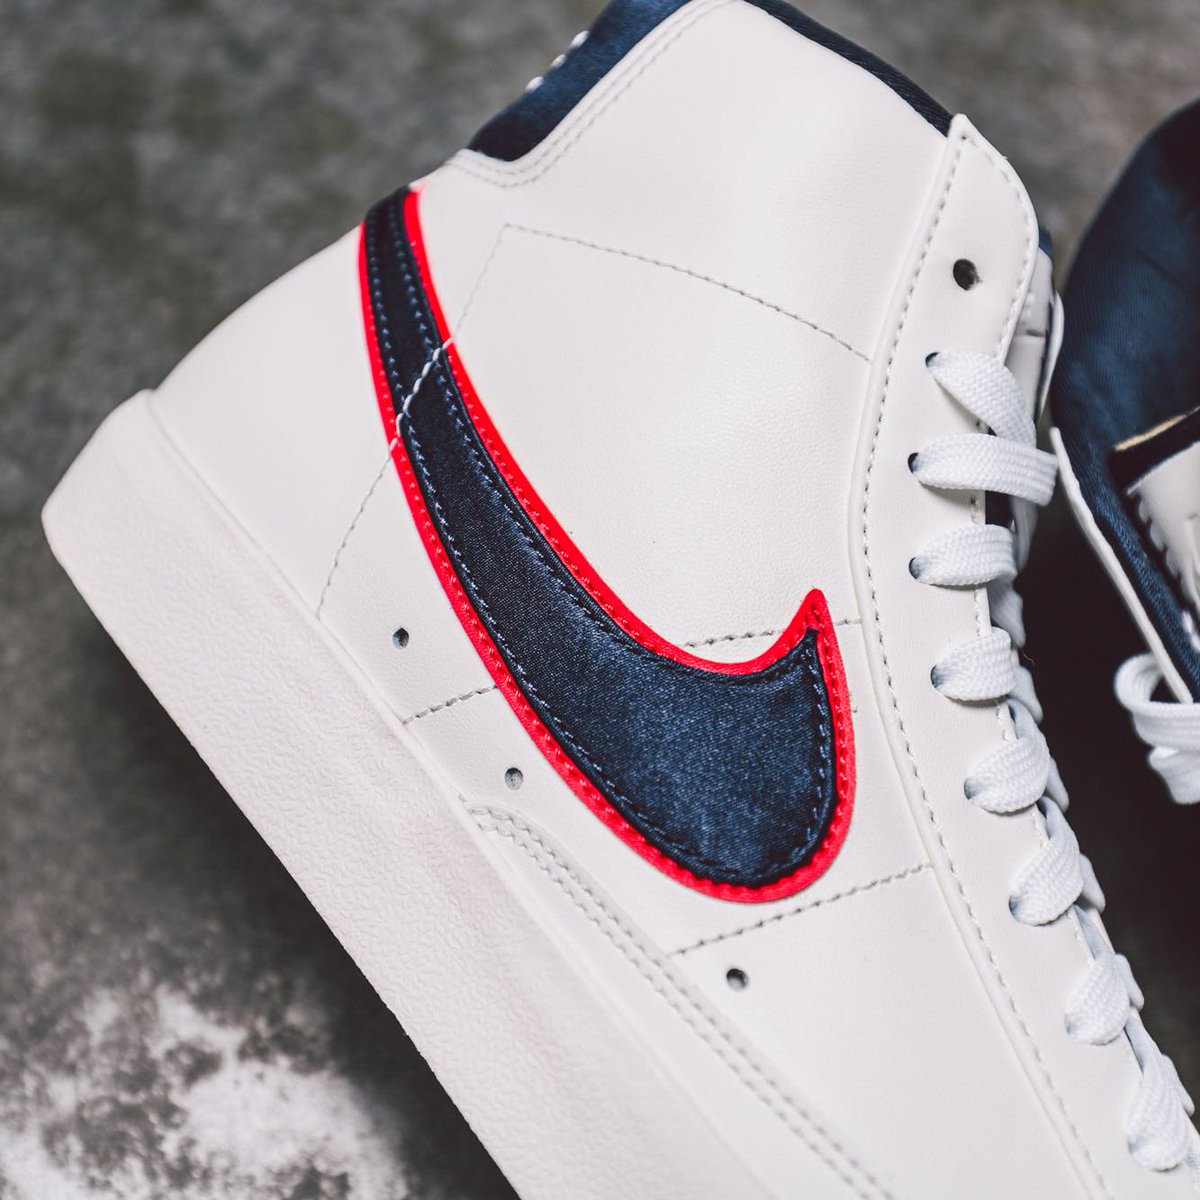 Departamento taquigrafía Rectángulo BAIT в Twitter: „The Nike Blazer Mid 77 Vintage QS - City Pride pays homage  to the city of Chicago &amp; takes inspiration from their old school  uniforms. Visit us now at